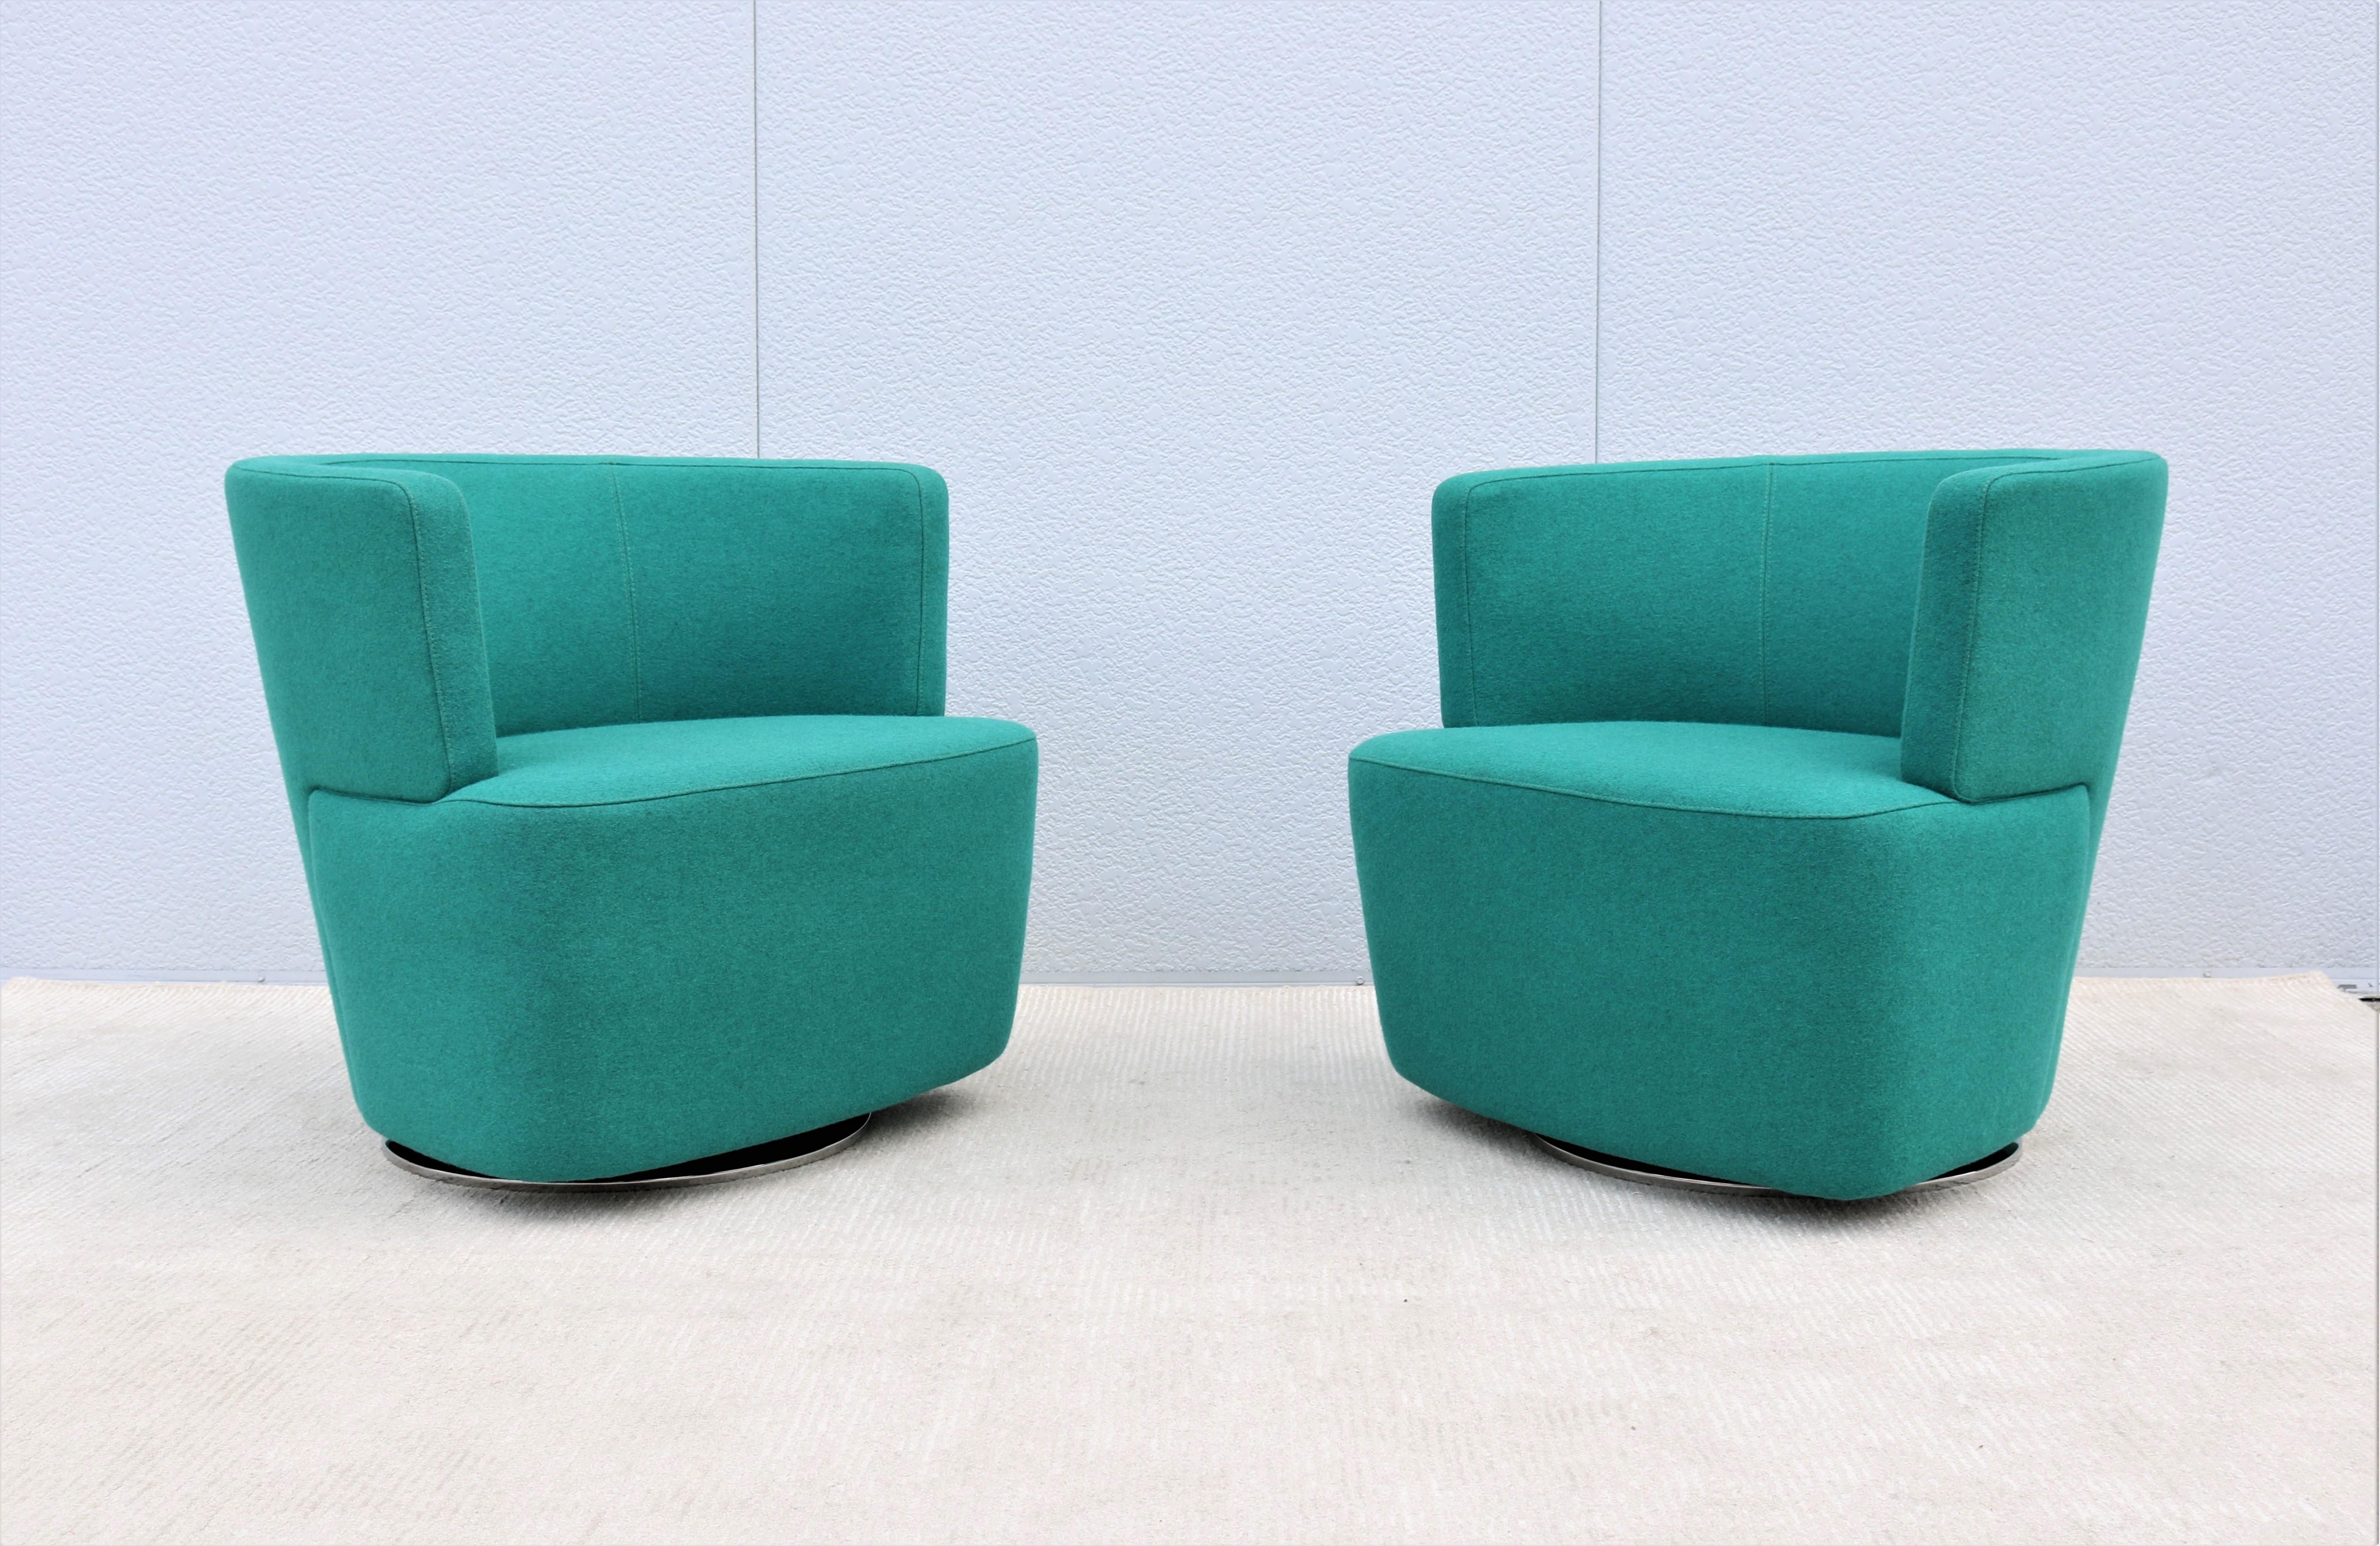 American Modern EOOS for Coalesse Joel Blue Swivel Lounge Chairs by Walter Knoll, a Pair For Sale